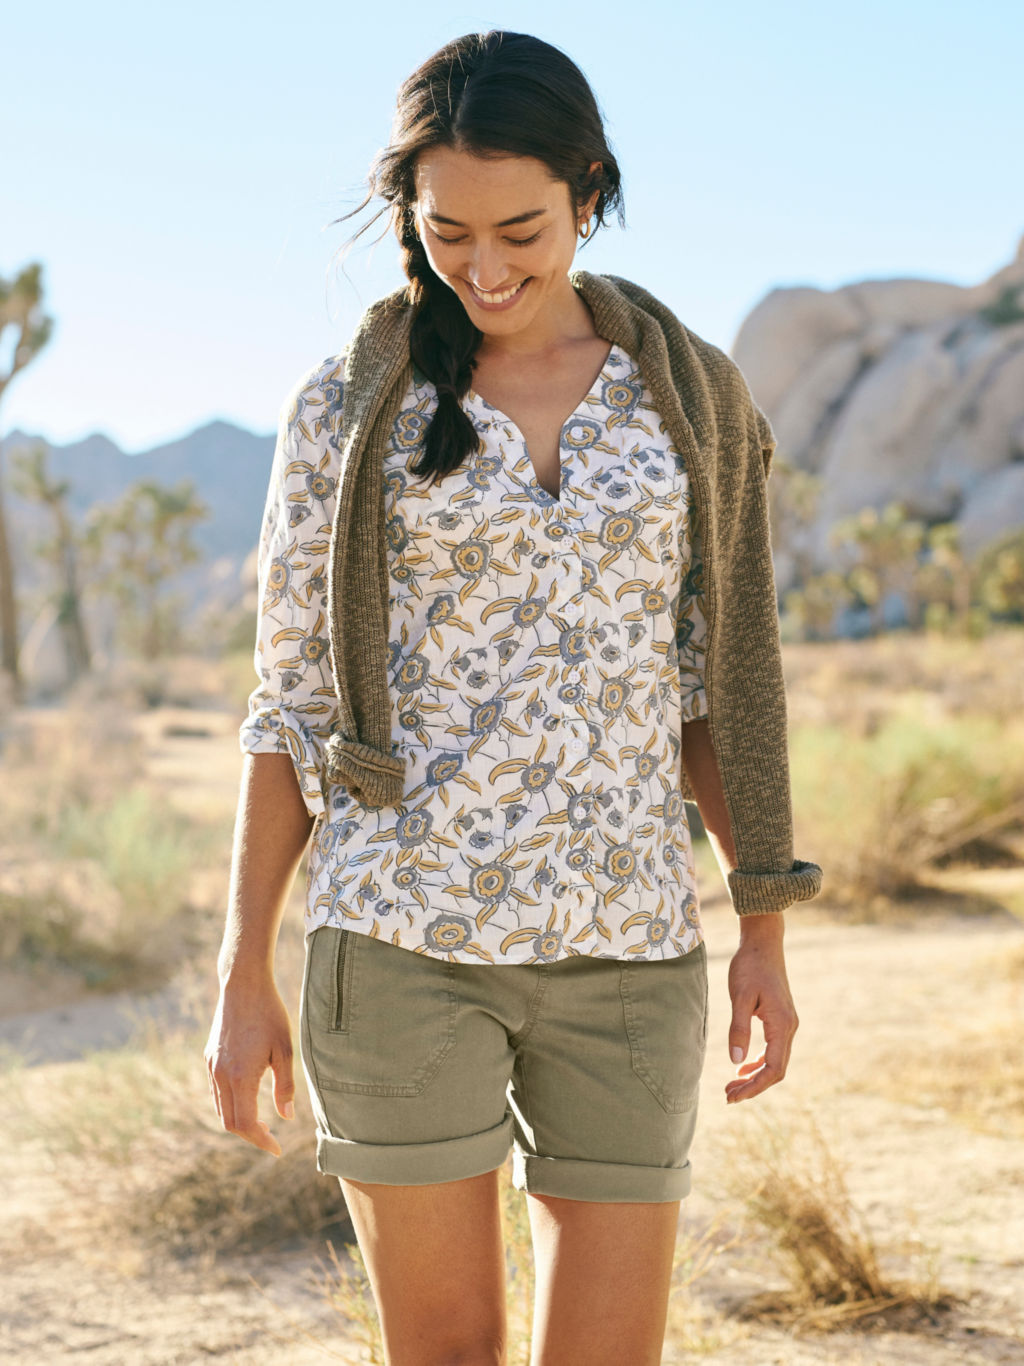 A model wearing a floral print shirt in white with yellow and grey flowers, olive khaki shorts, and a dark olive textured sweater draped over her shoulders